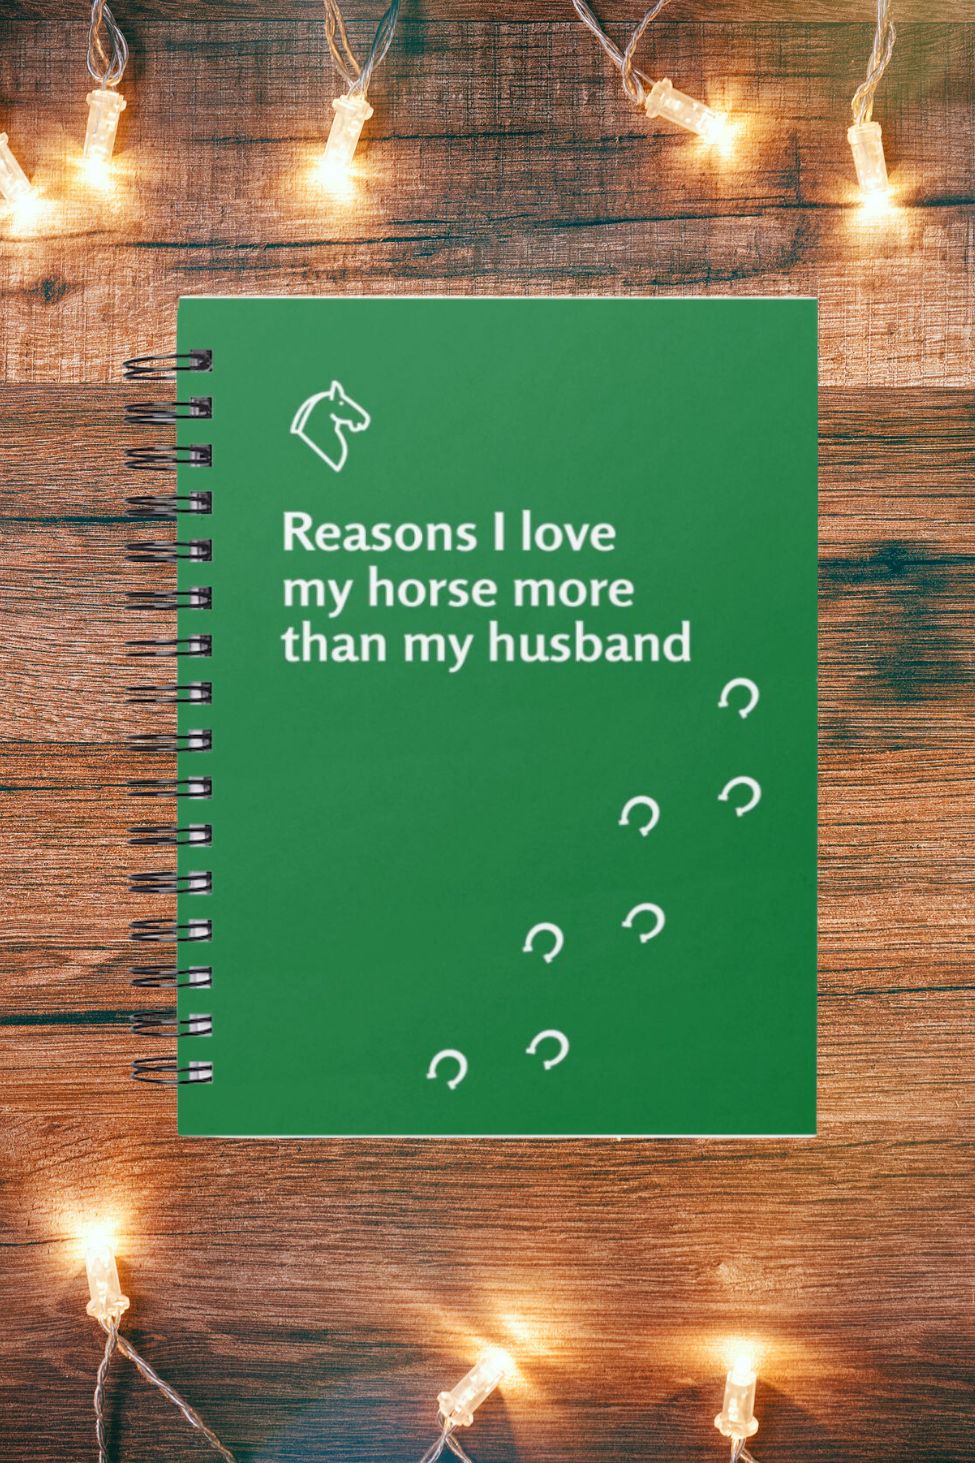 Reasons I love my horse more than my husband - Spiral bound lined notebook